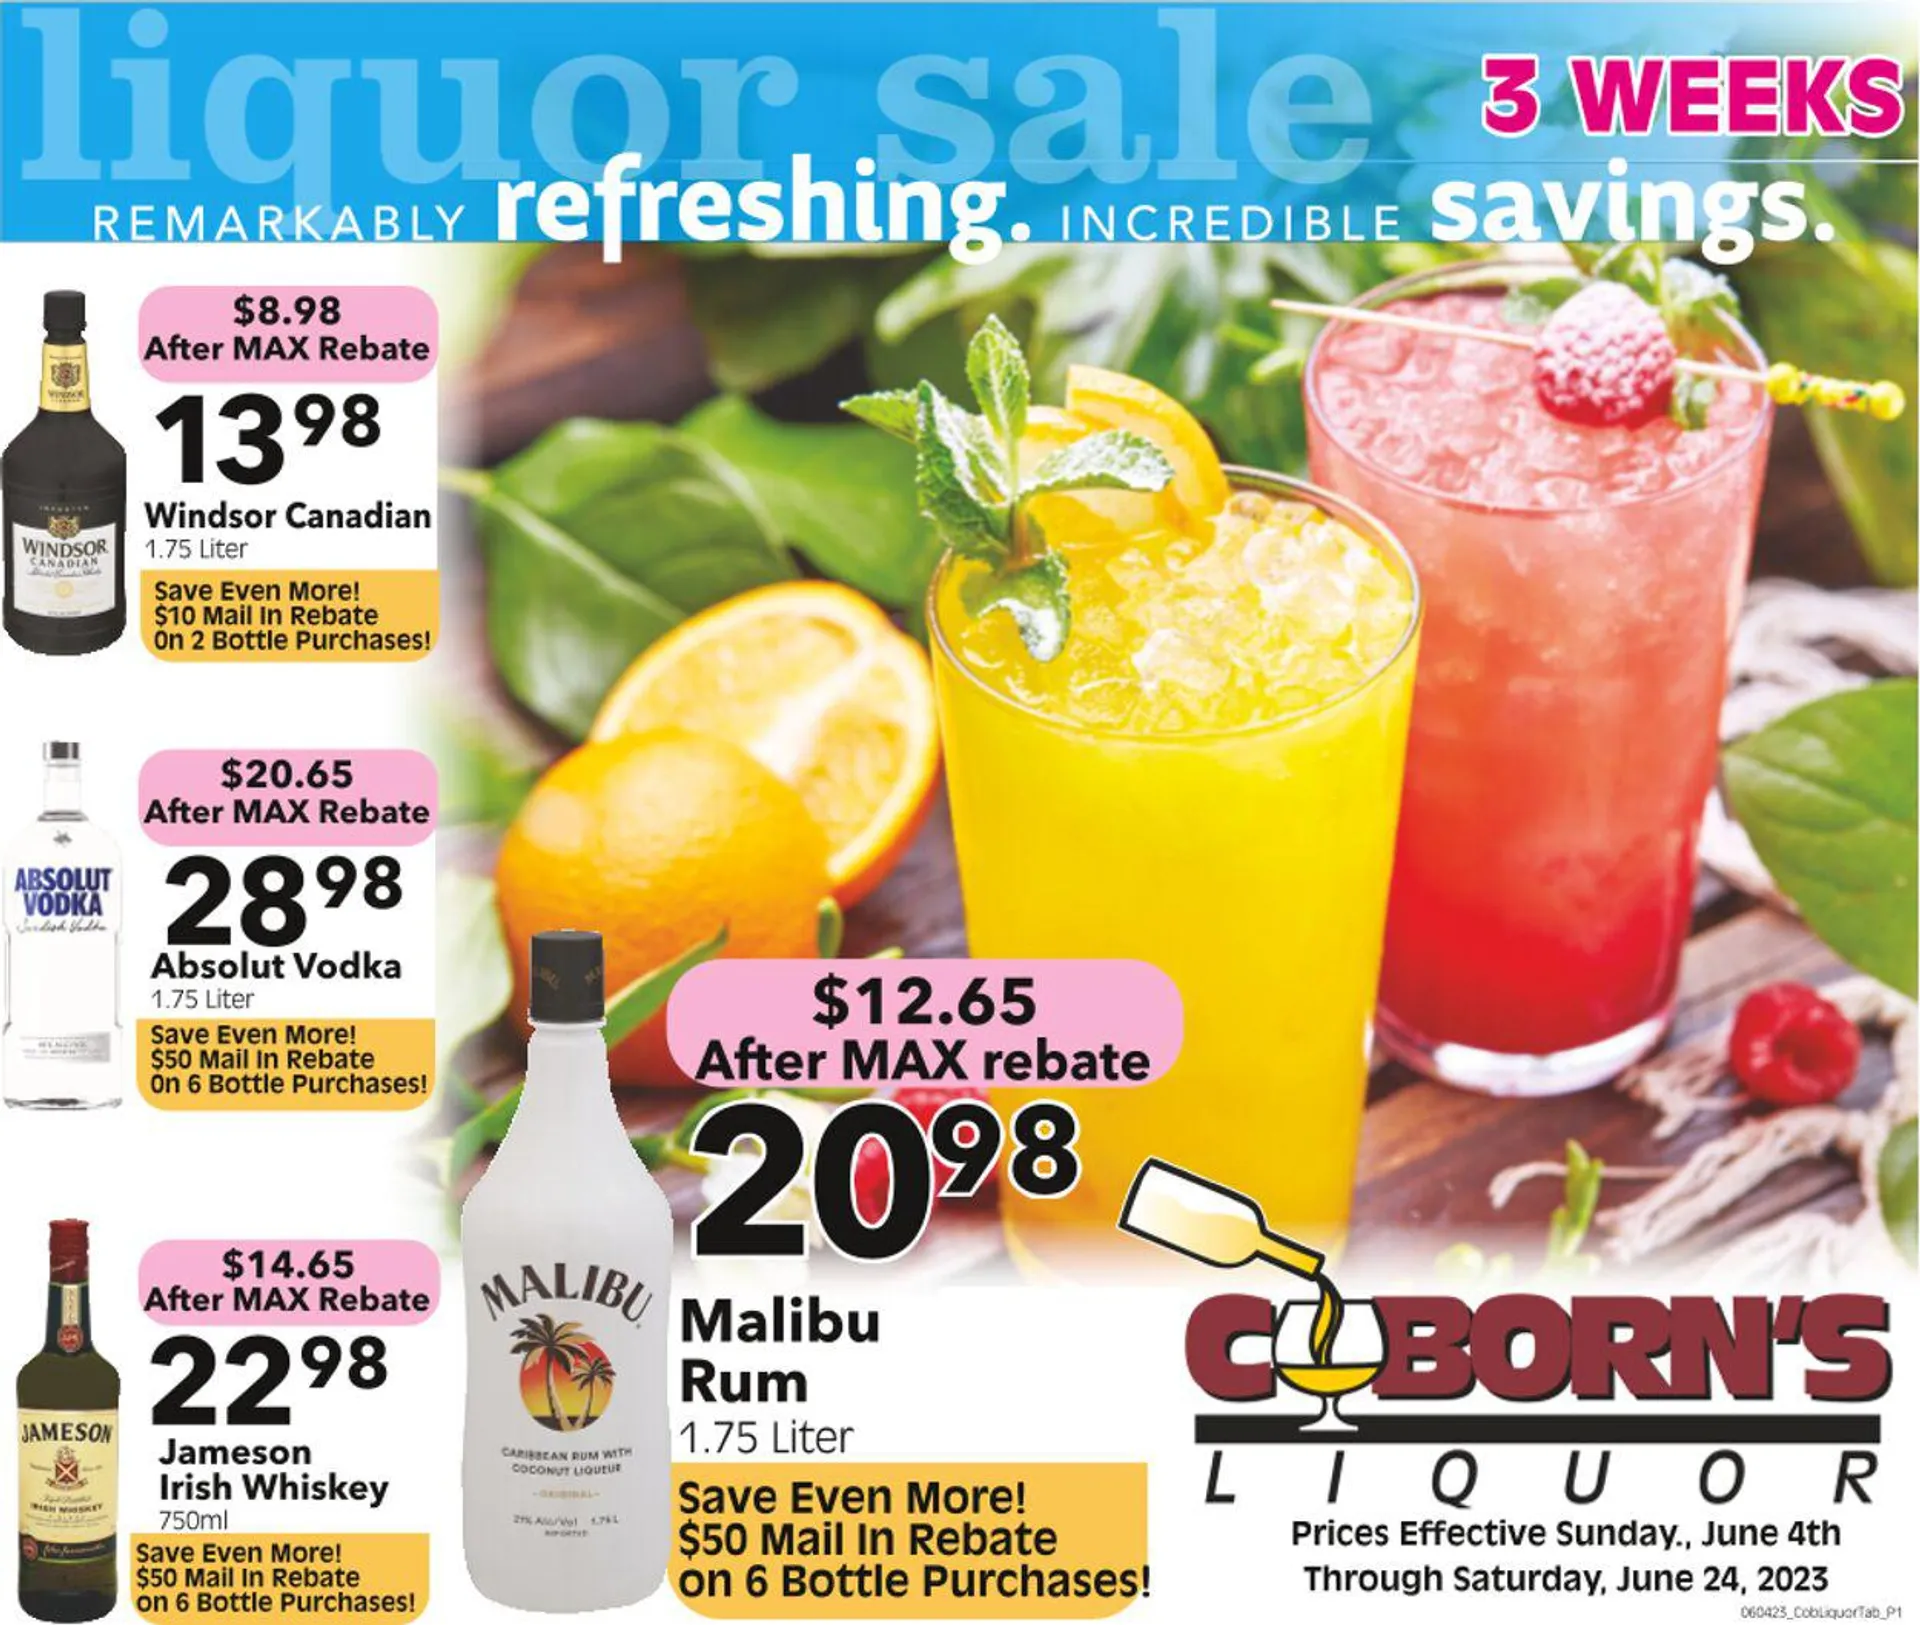 Coborns Current weekly ad - 1